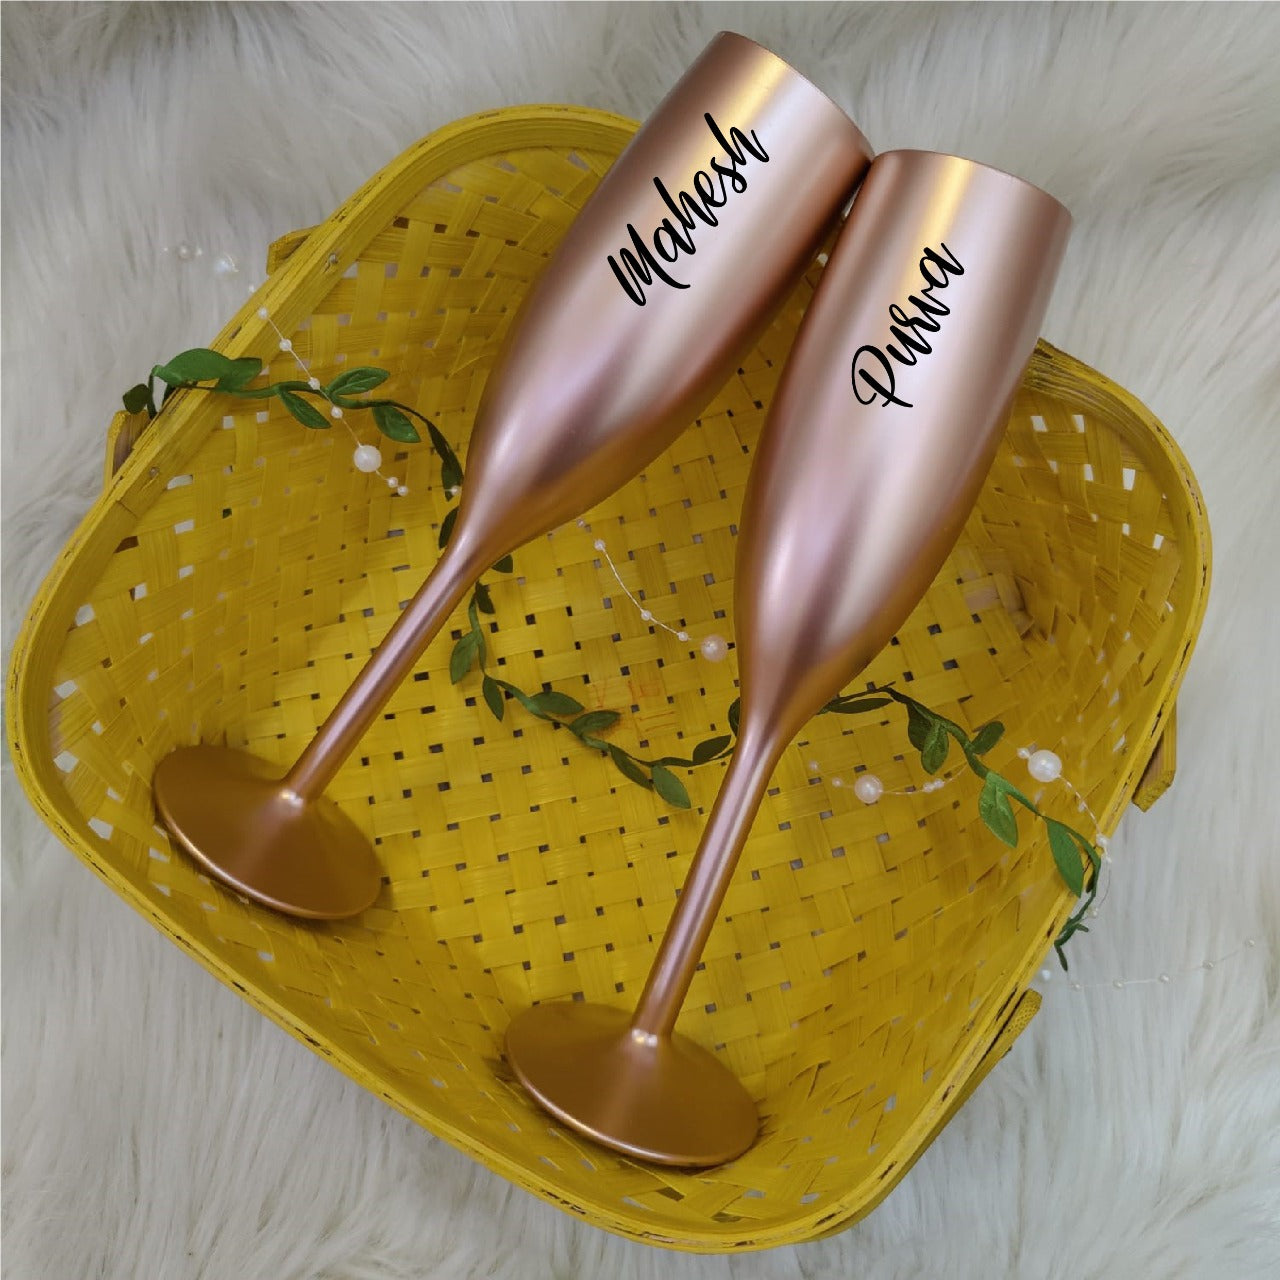 Unbreakable Champagne Flutes with Customisable Name - Set of 2 Copper